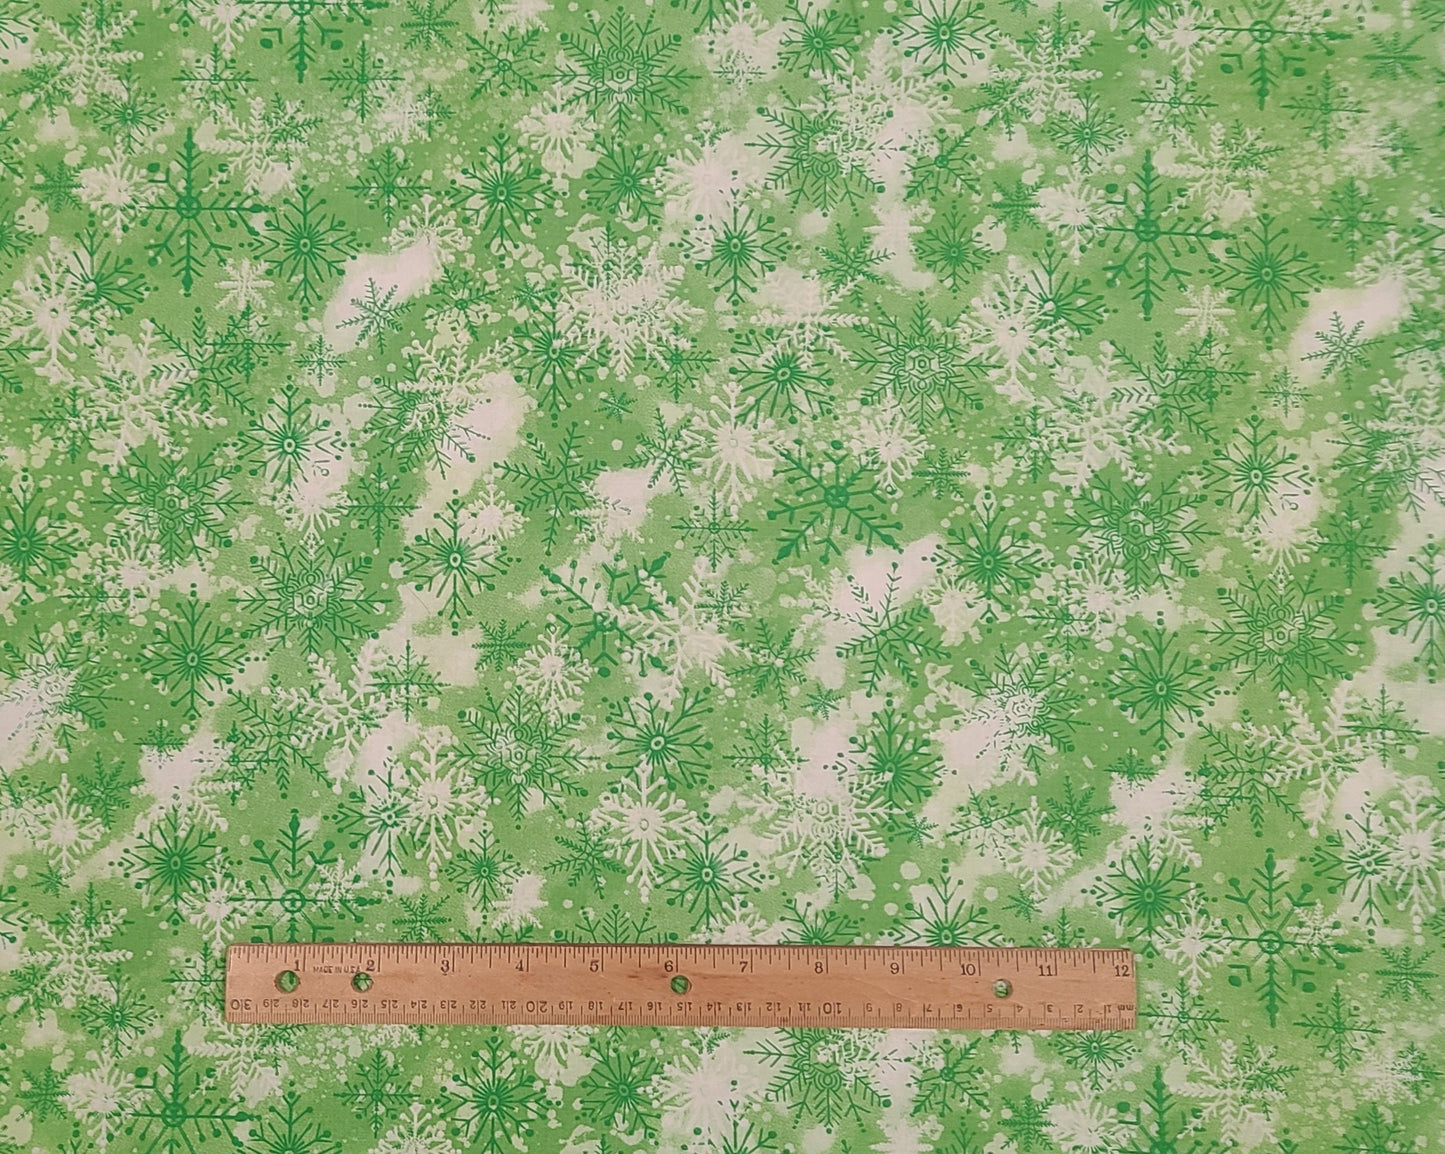 Designed Exclusively for Joann - White and Bright Green Tonal Fabric / Green and White Snowflake Pattern